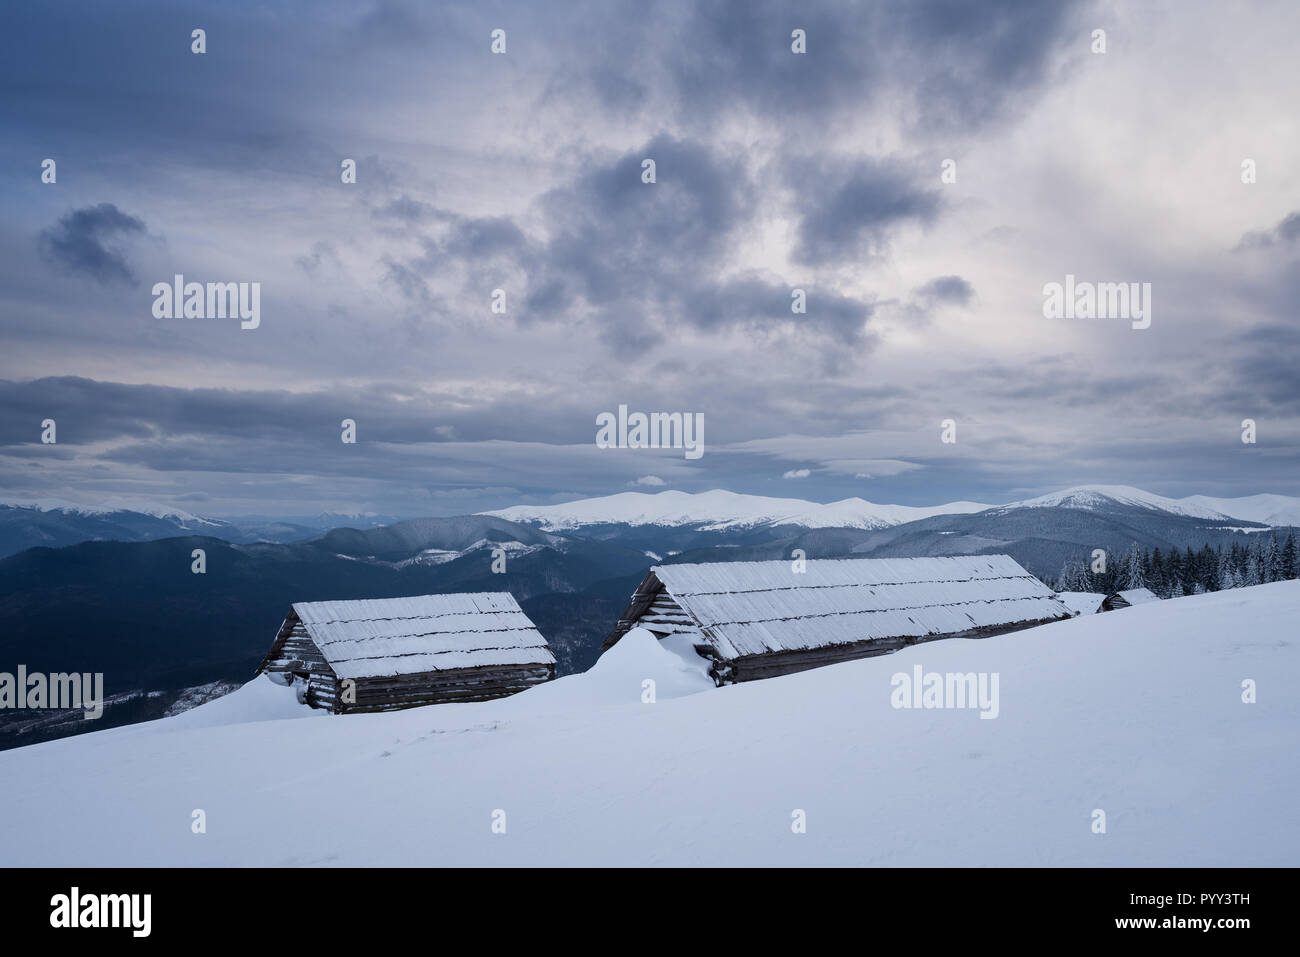 Mountain huts in the snow. Winter landscape with a stormy sky. Severe weather Stock Photo